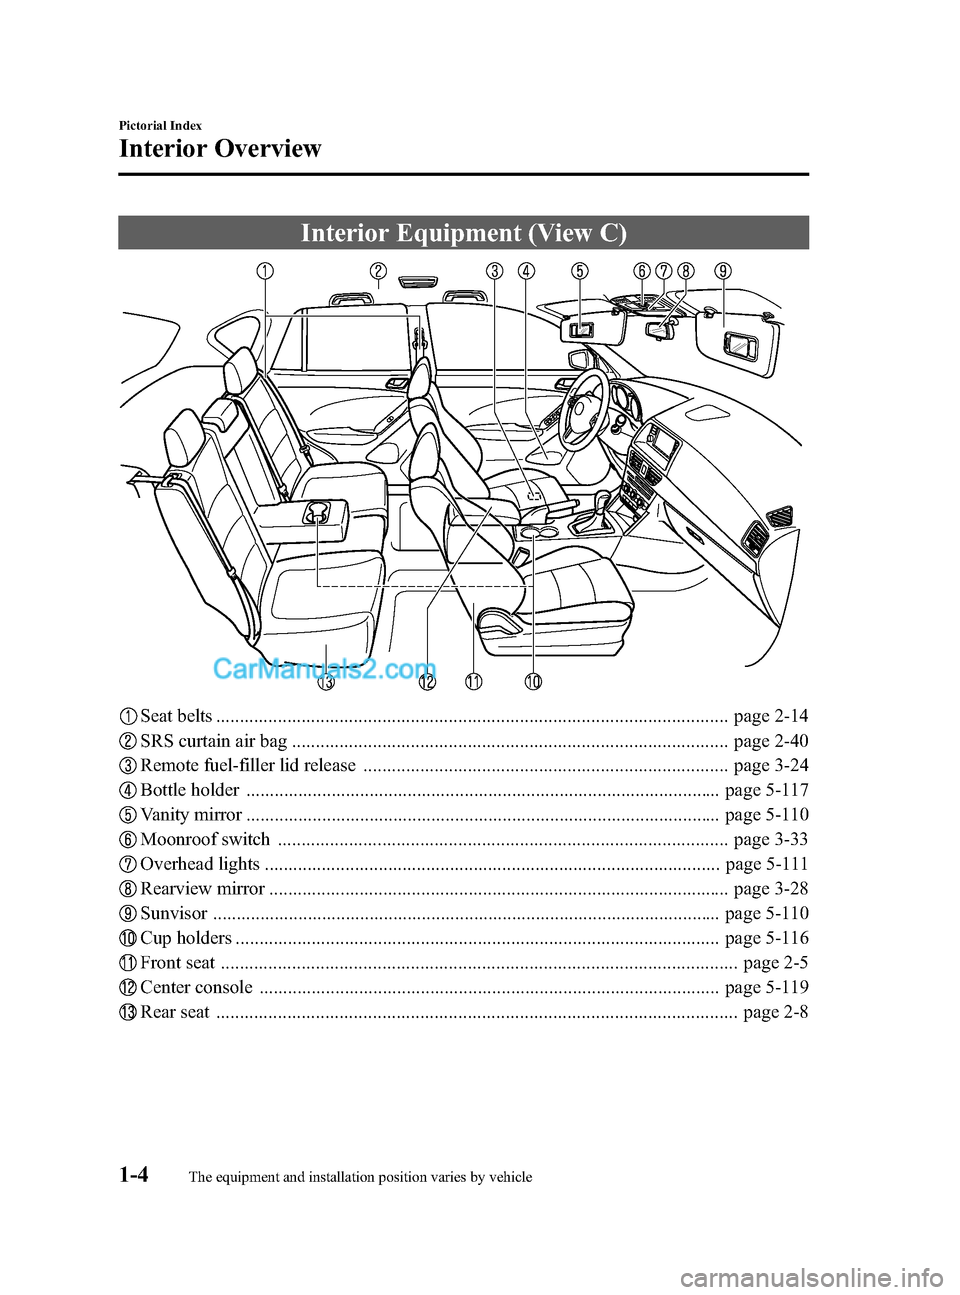 MAZDA MODEL CX-5 2015  Owners Manual (in English) Black plate (10,1)
Interior Equipment (View C)
Seat belts ............................................................................................................ page 2-14
SRS curtain air bag ...